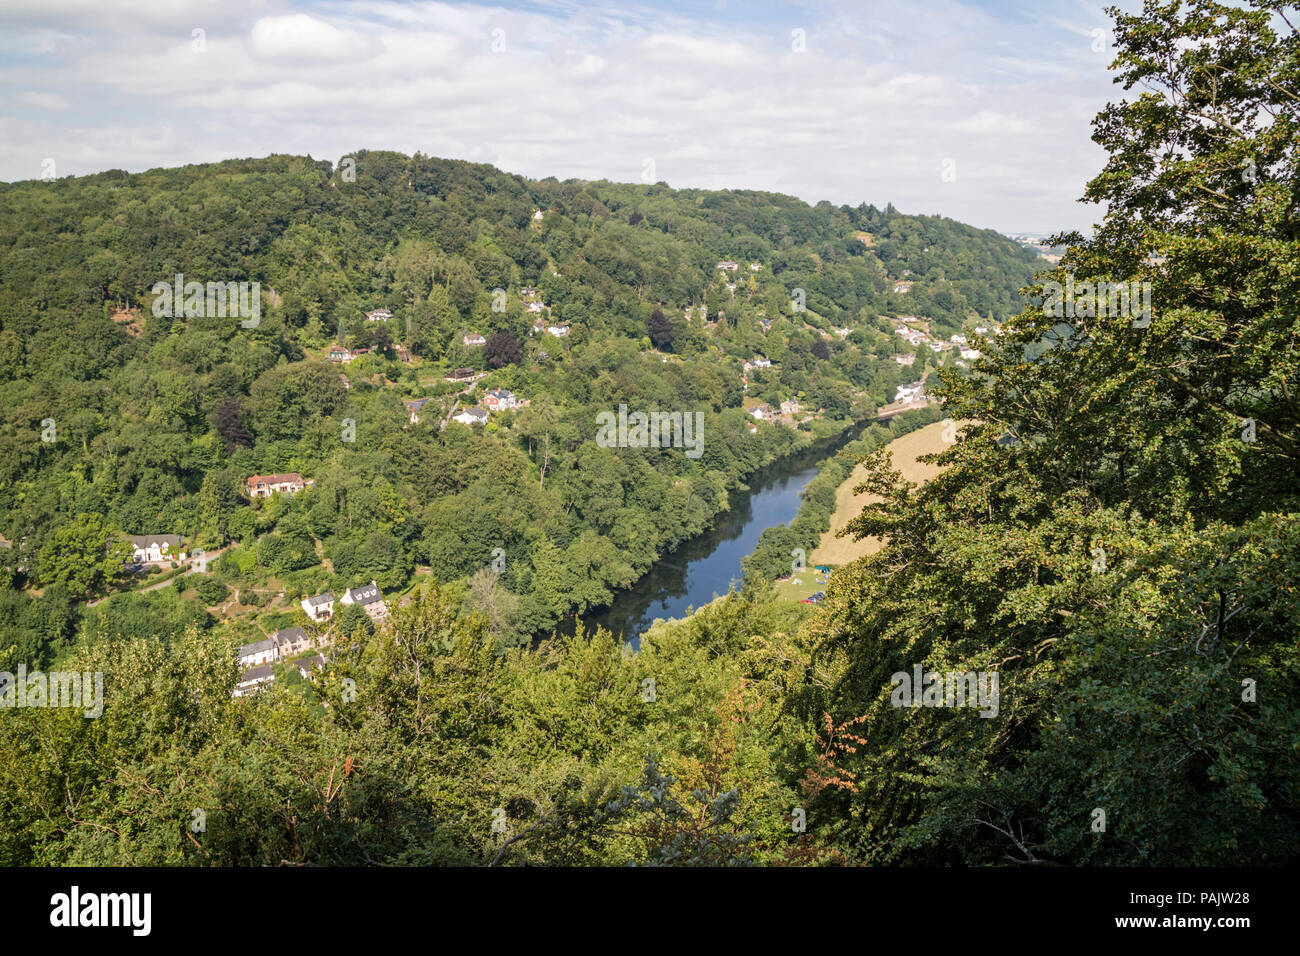 A view over the River Wye at Symonds Yat, Wye Valley, Herefordshire, England, UK Stock Photo